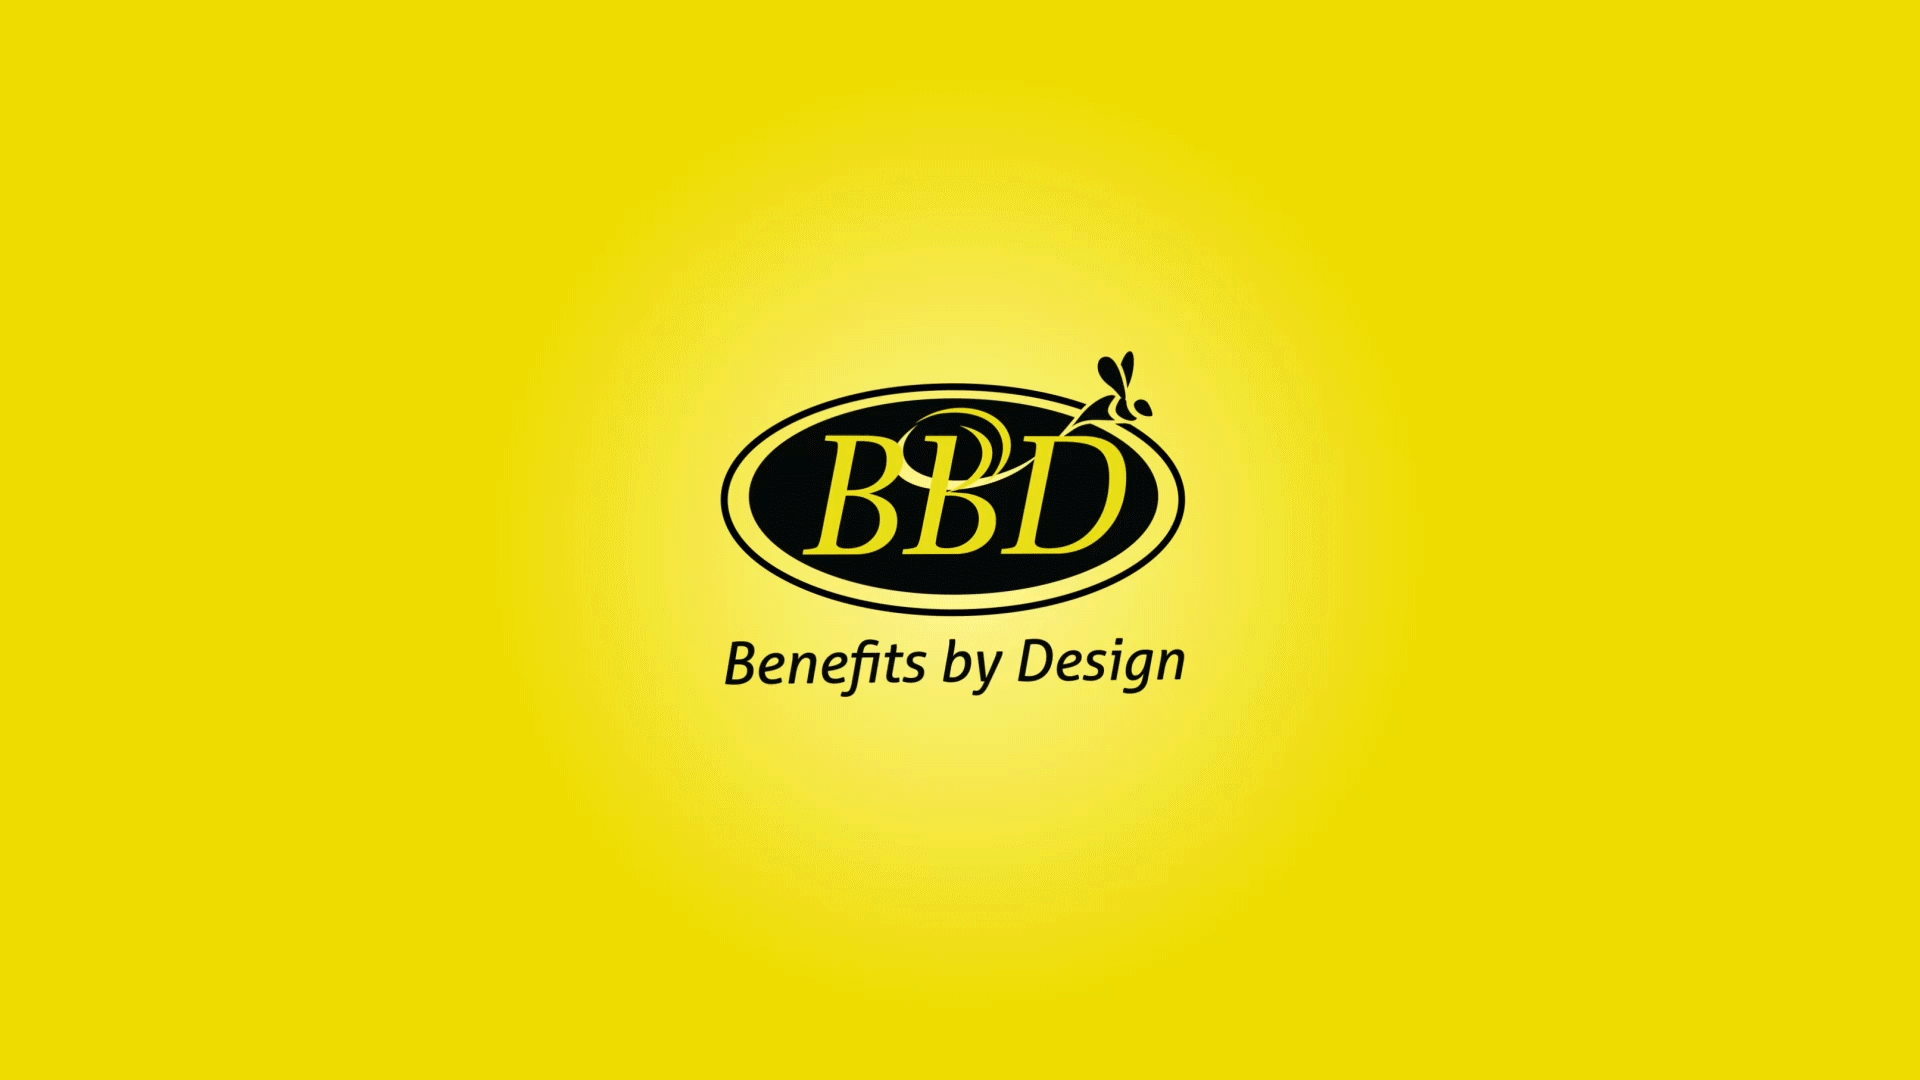 GIF of old BBD logo transitioning to the new BBD logo